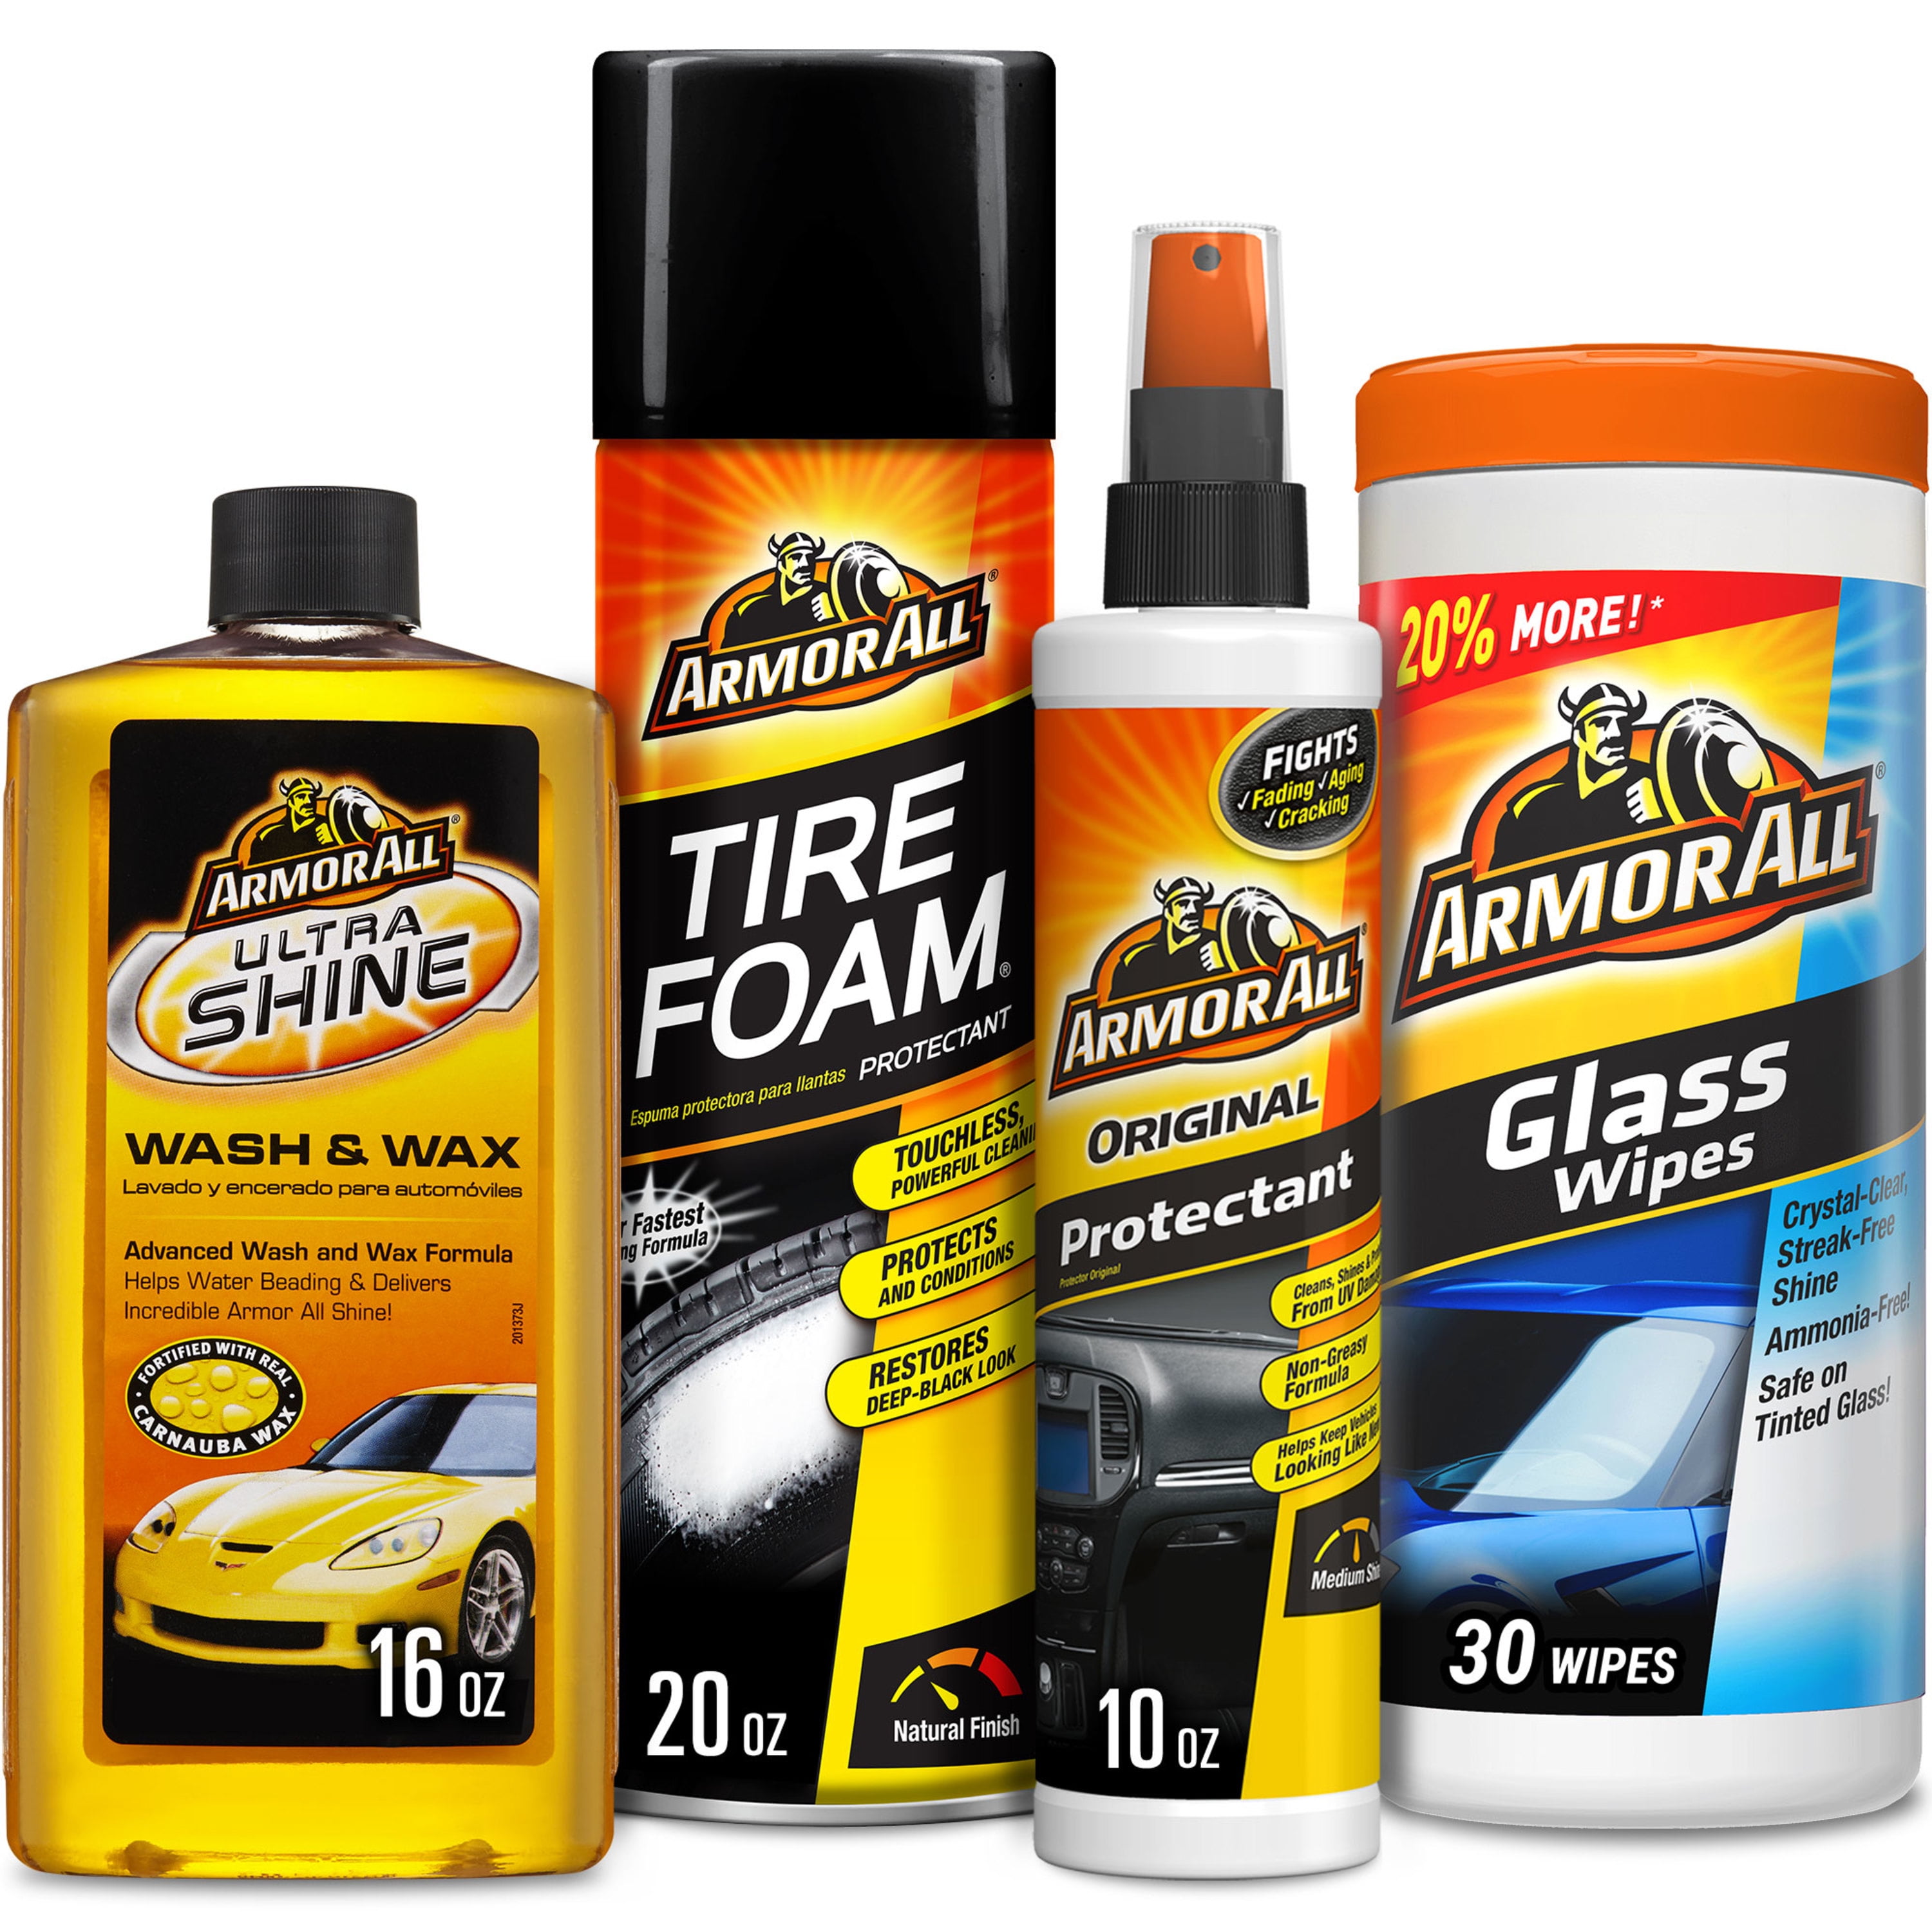 (2) Armor All Complete Car Care Kit Bundle - Give One, Keep One and Save!